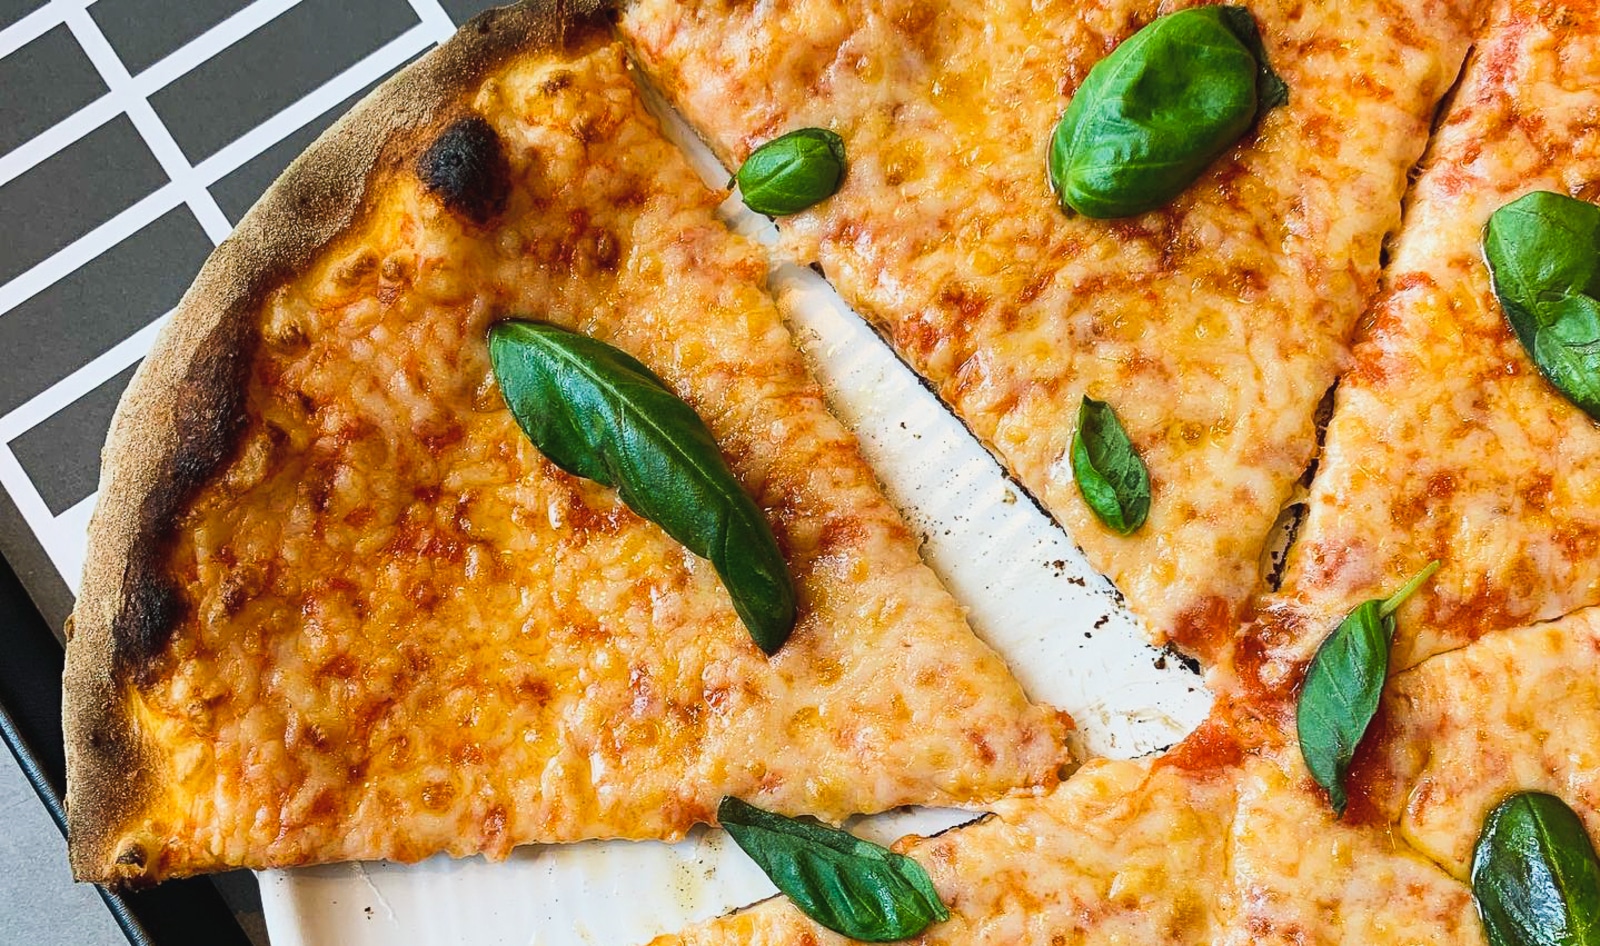 Have You Tried the New Dairy-Free Cheese on Whole Foods' Pizza? Here's the Scoop On That Vegan Mozzarella.